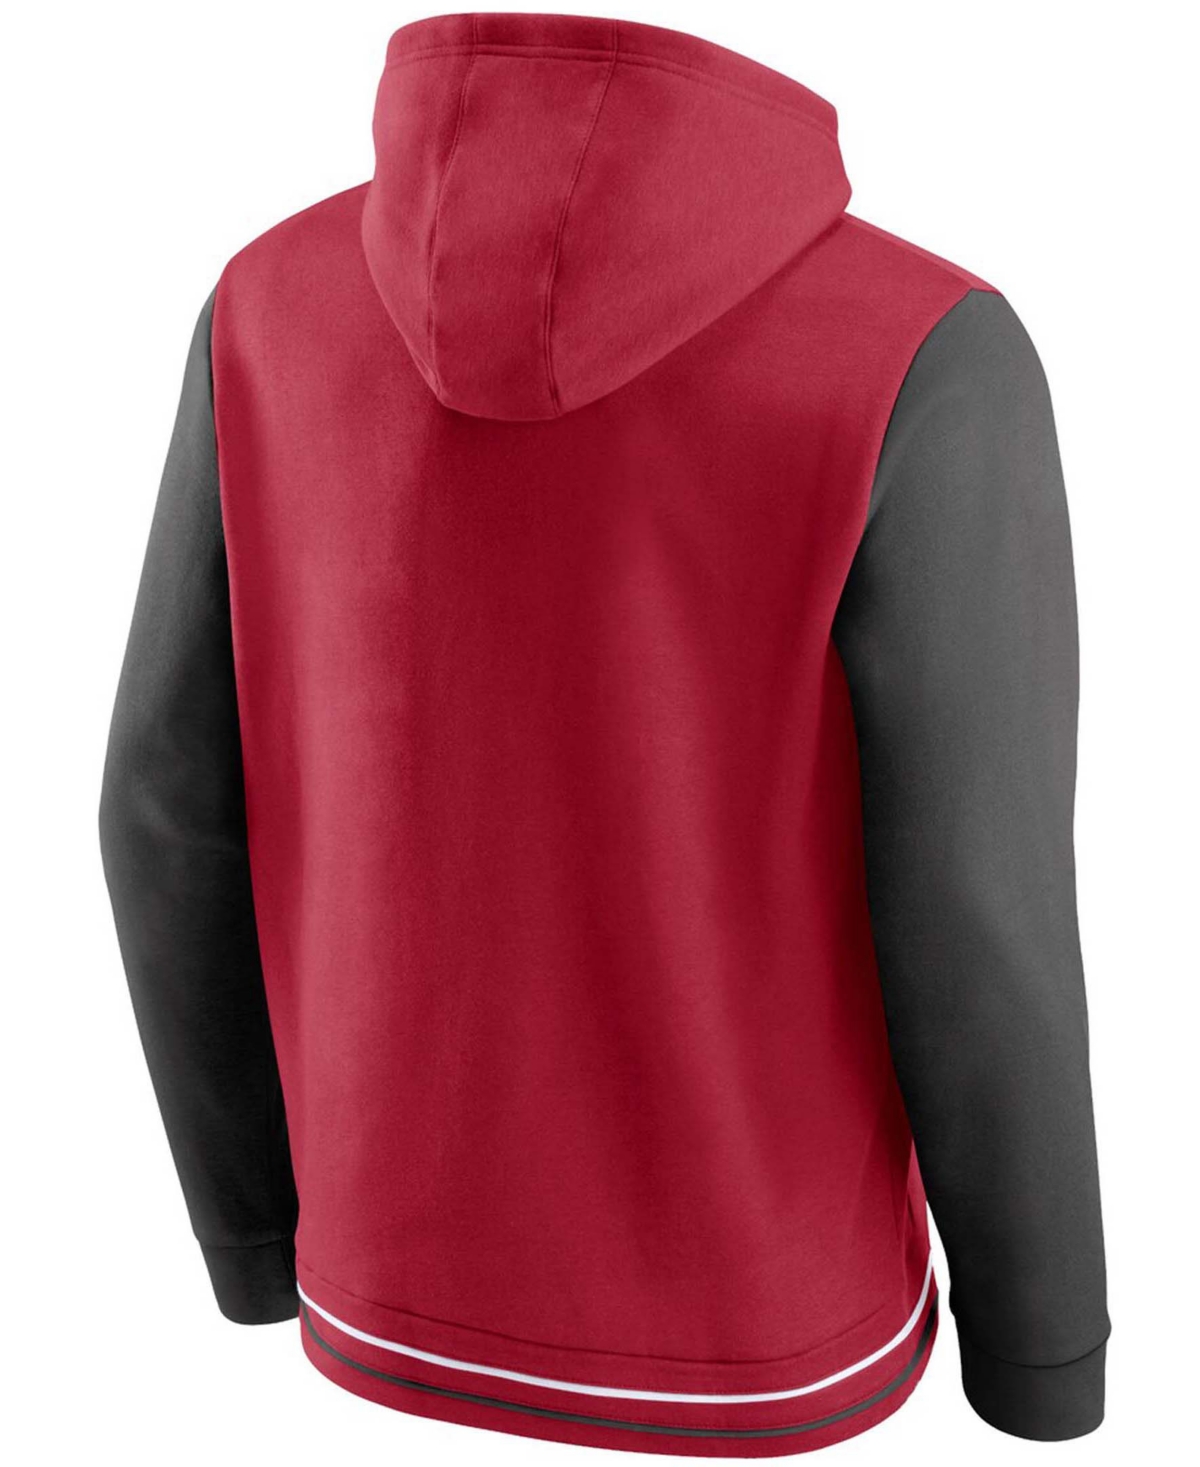 Shop Fanatics Men's Red, Pewter Tampa Bay Buccaneers Block Party Pullover Hoodie